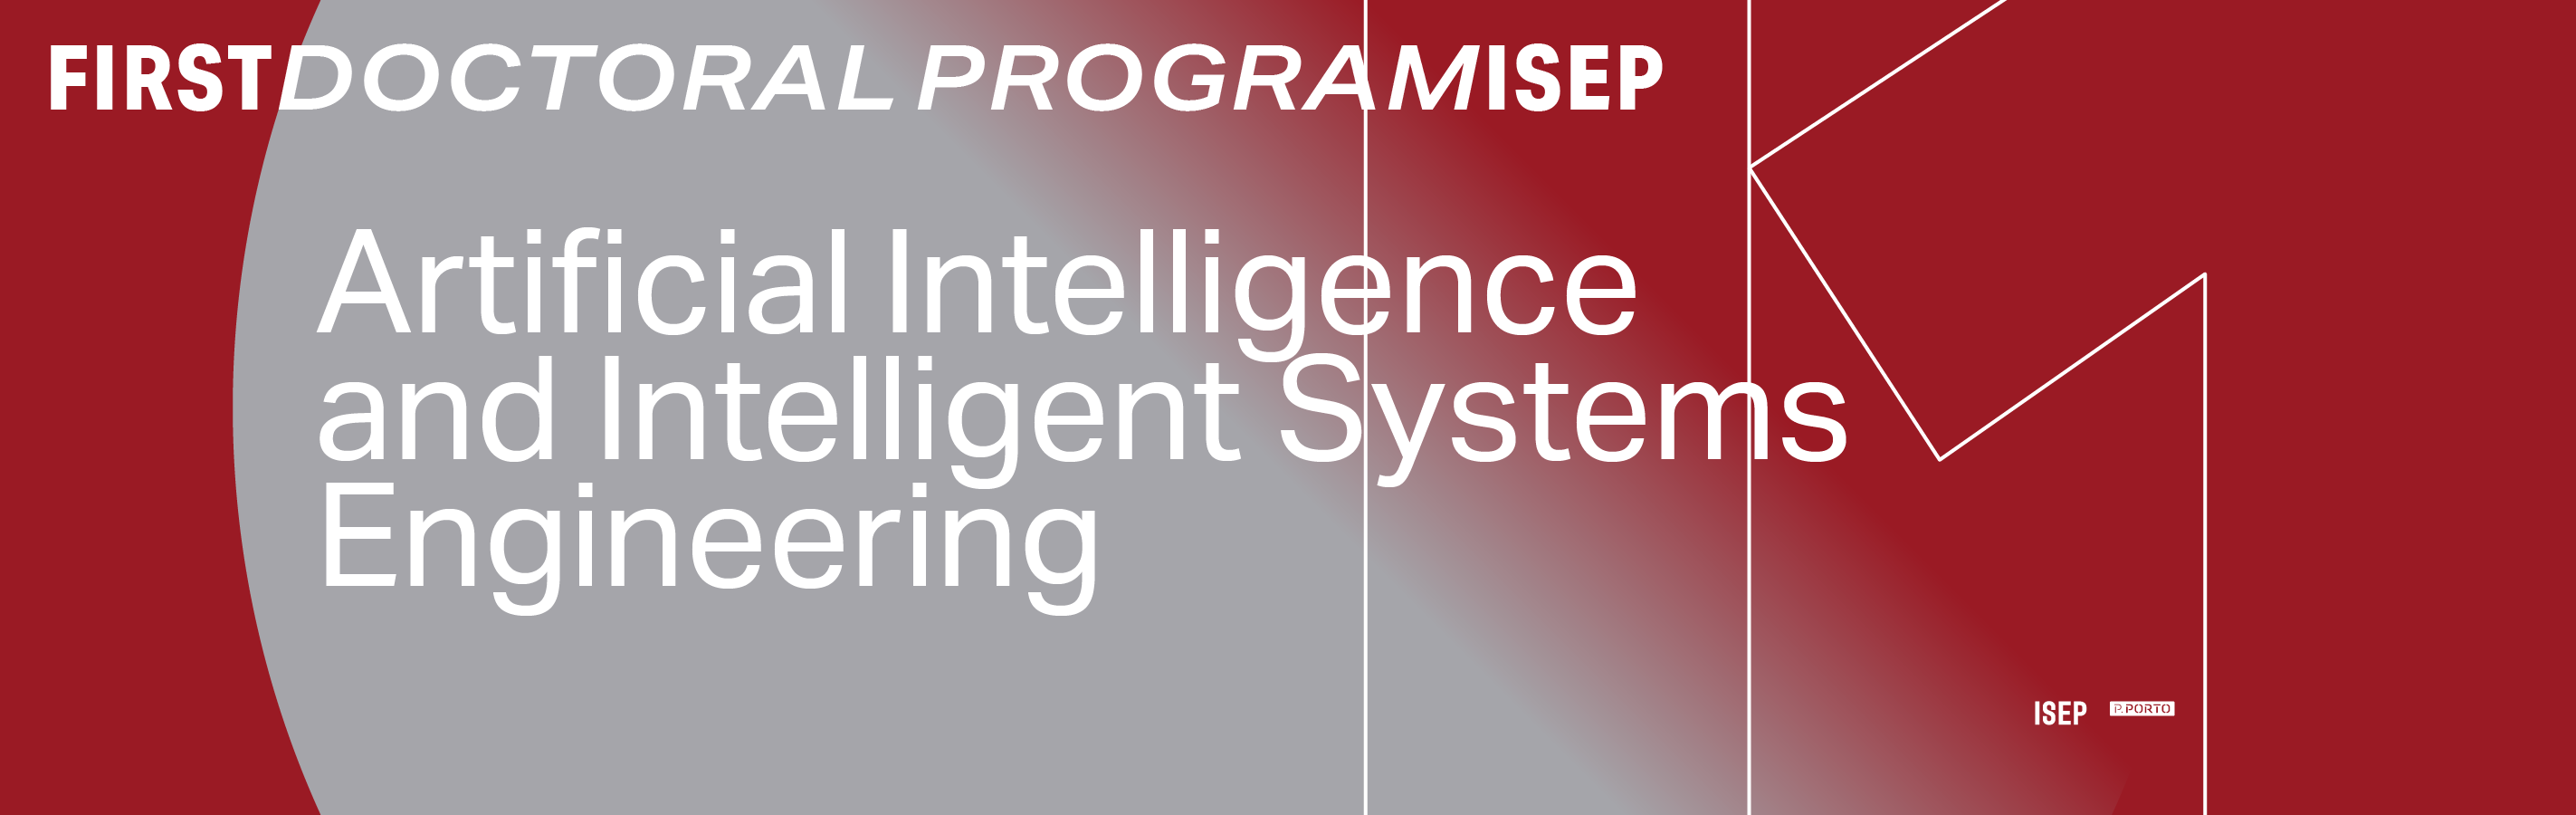 1st Doctoral Program at ISEP: Artificial Intelligence and Intelligent Systems Engineering